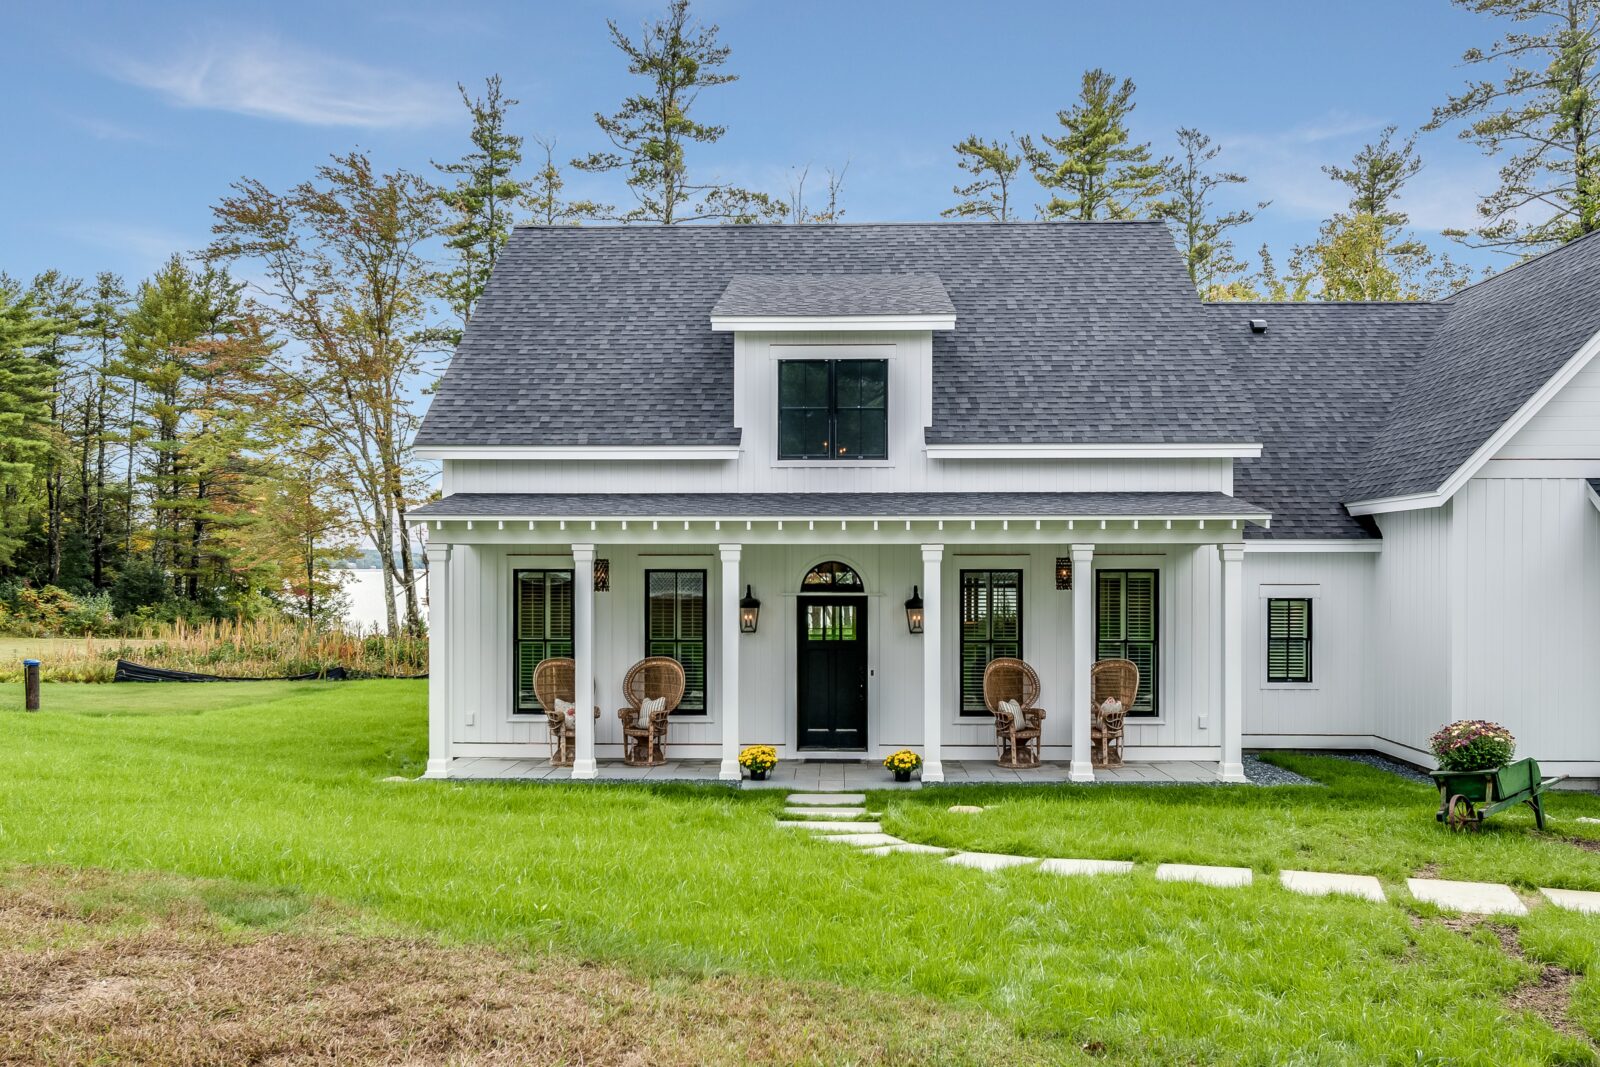 6 Clever Porch Ideas to Increase Curb Appeal